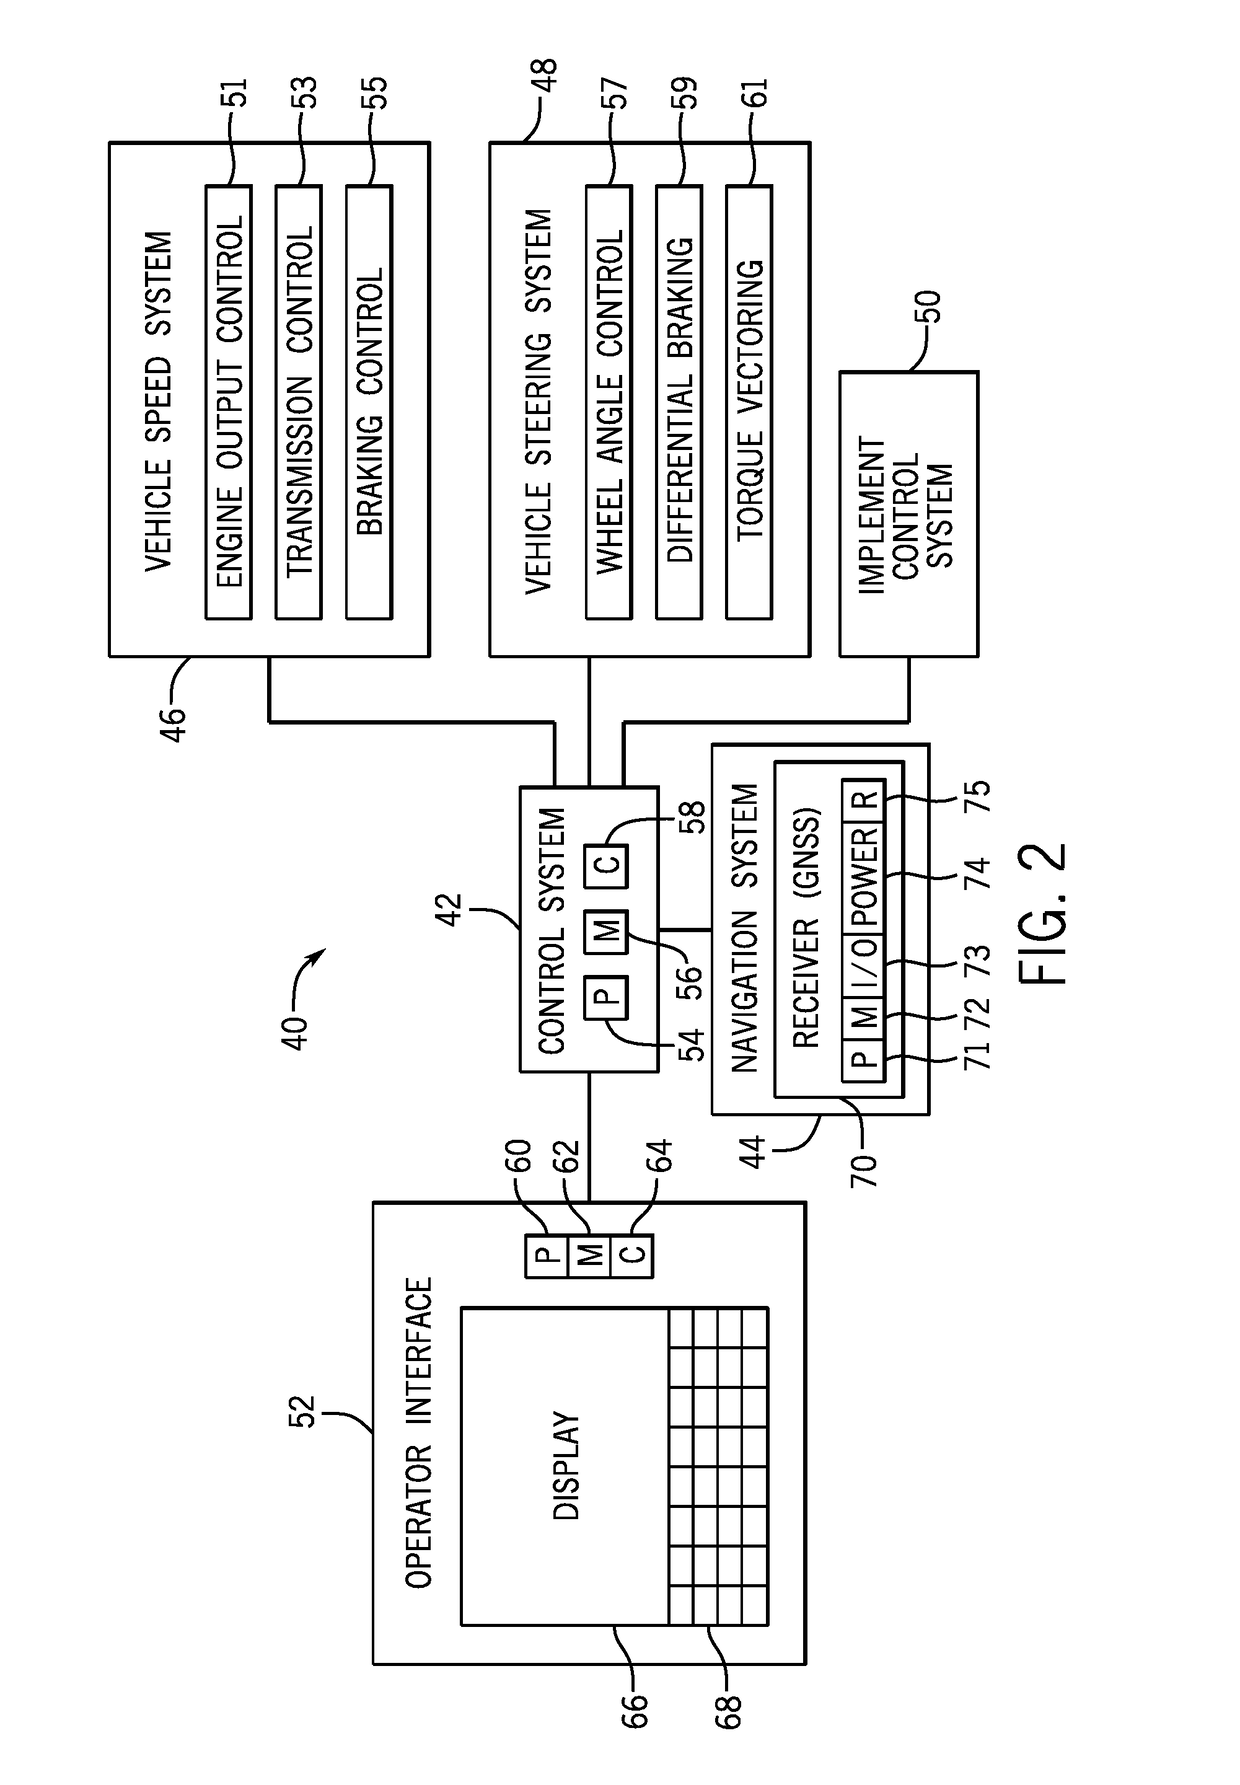 System and method for generating and implementing an end-of-row turn path